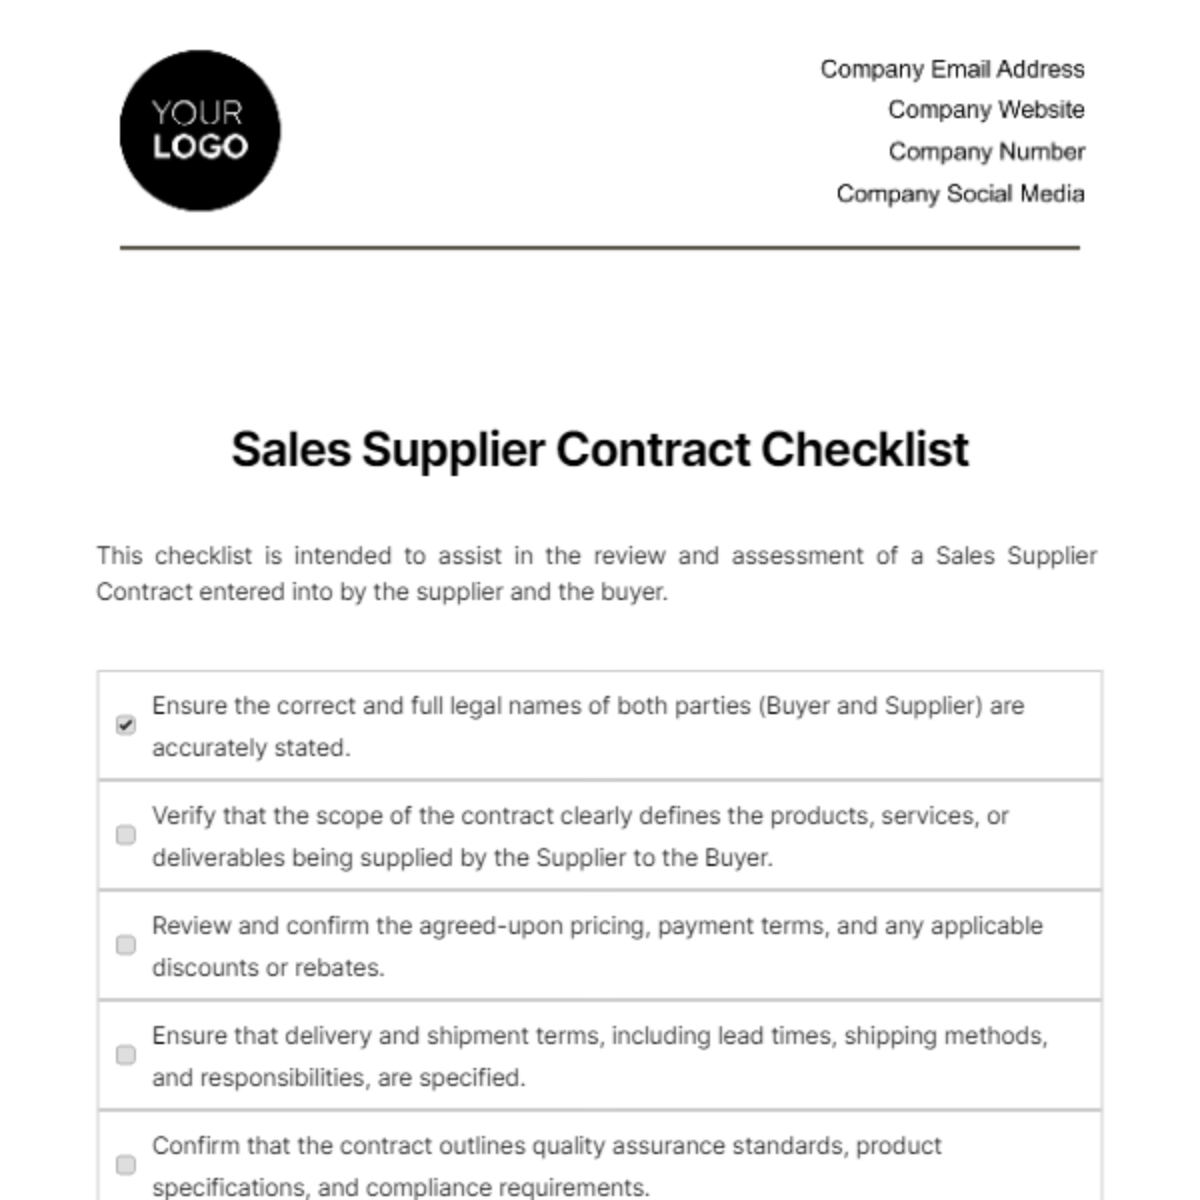 Free Sales Supplier Contract Checklist Template